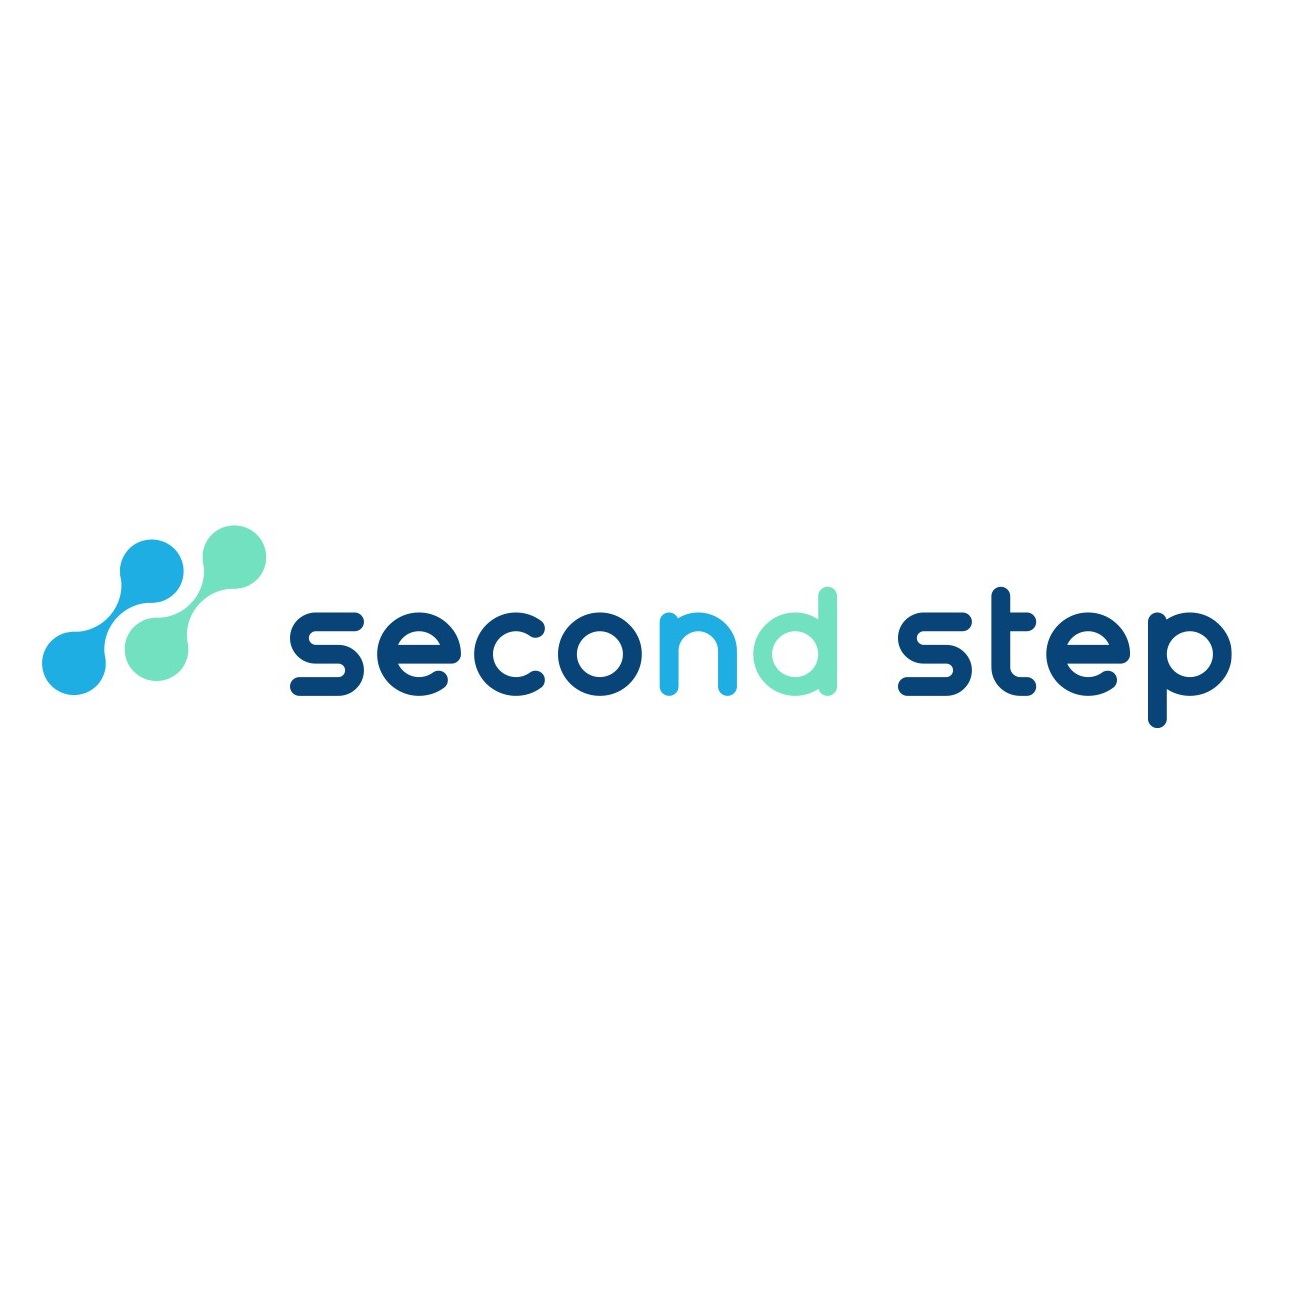 Second Step outsourcing company